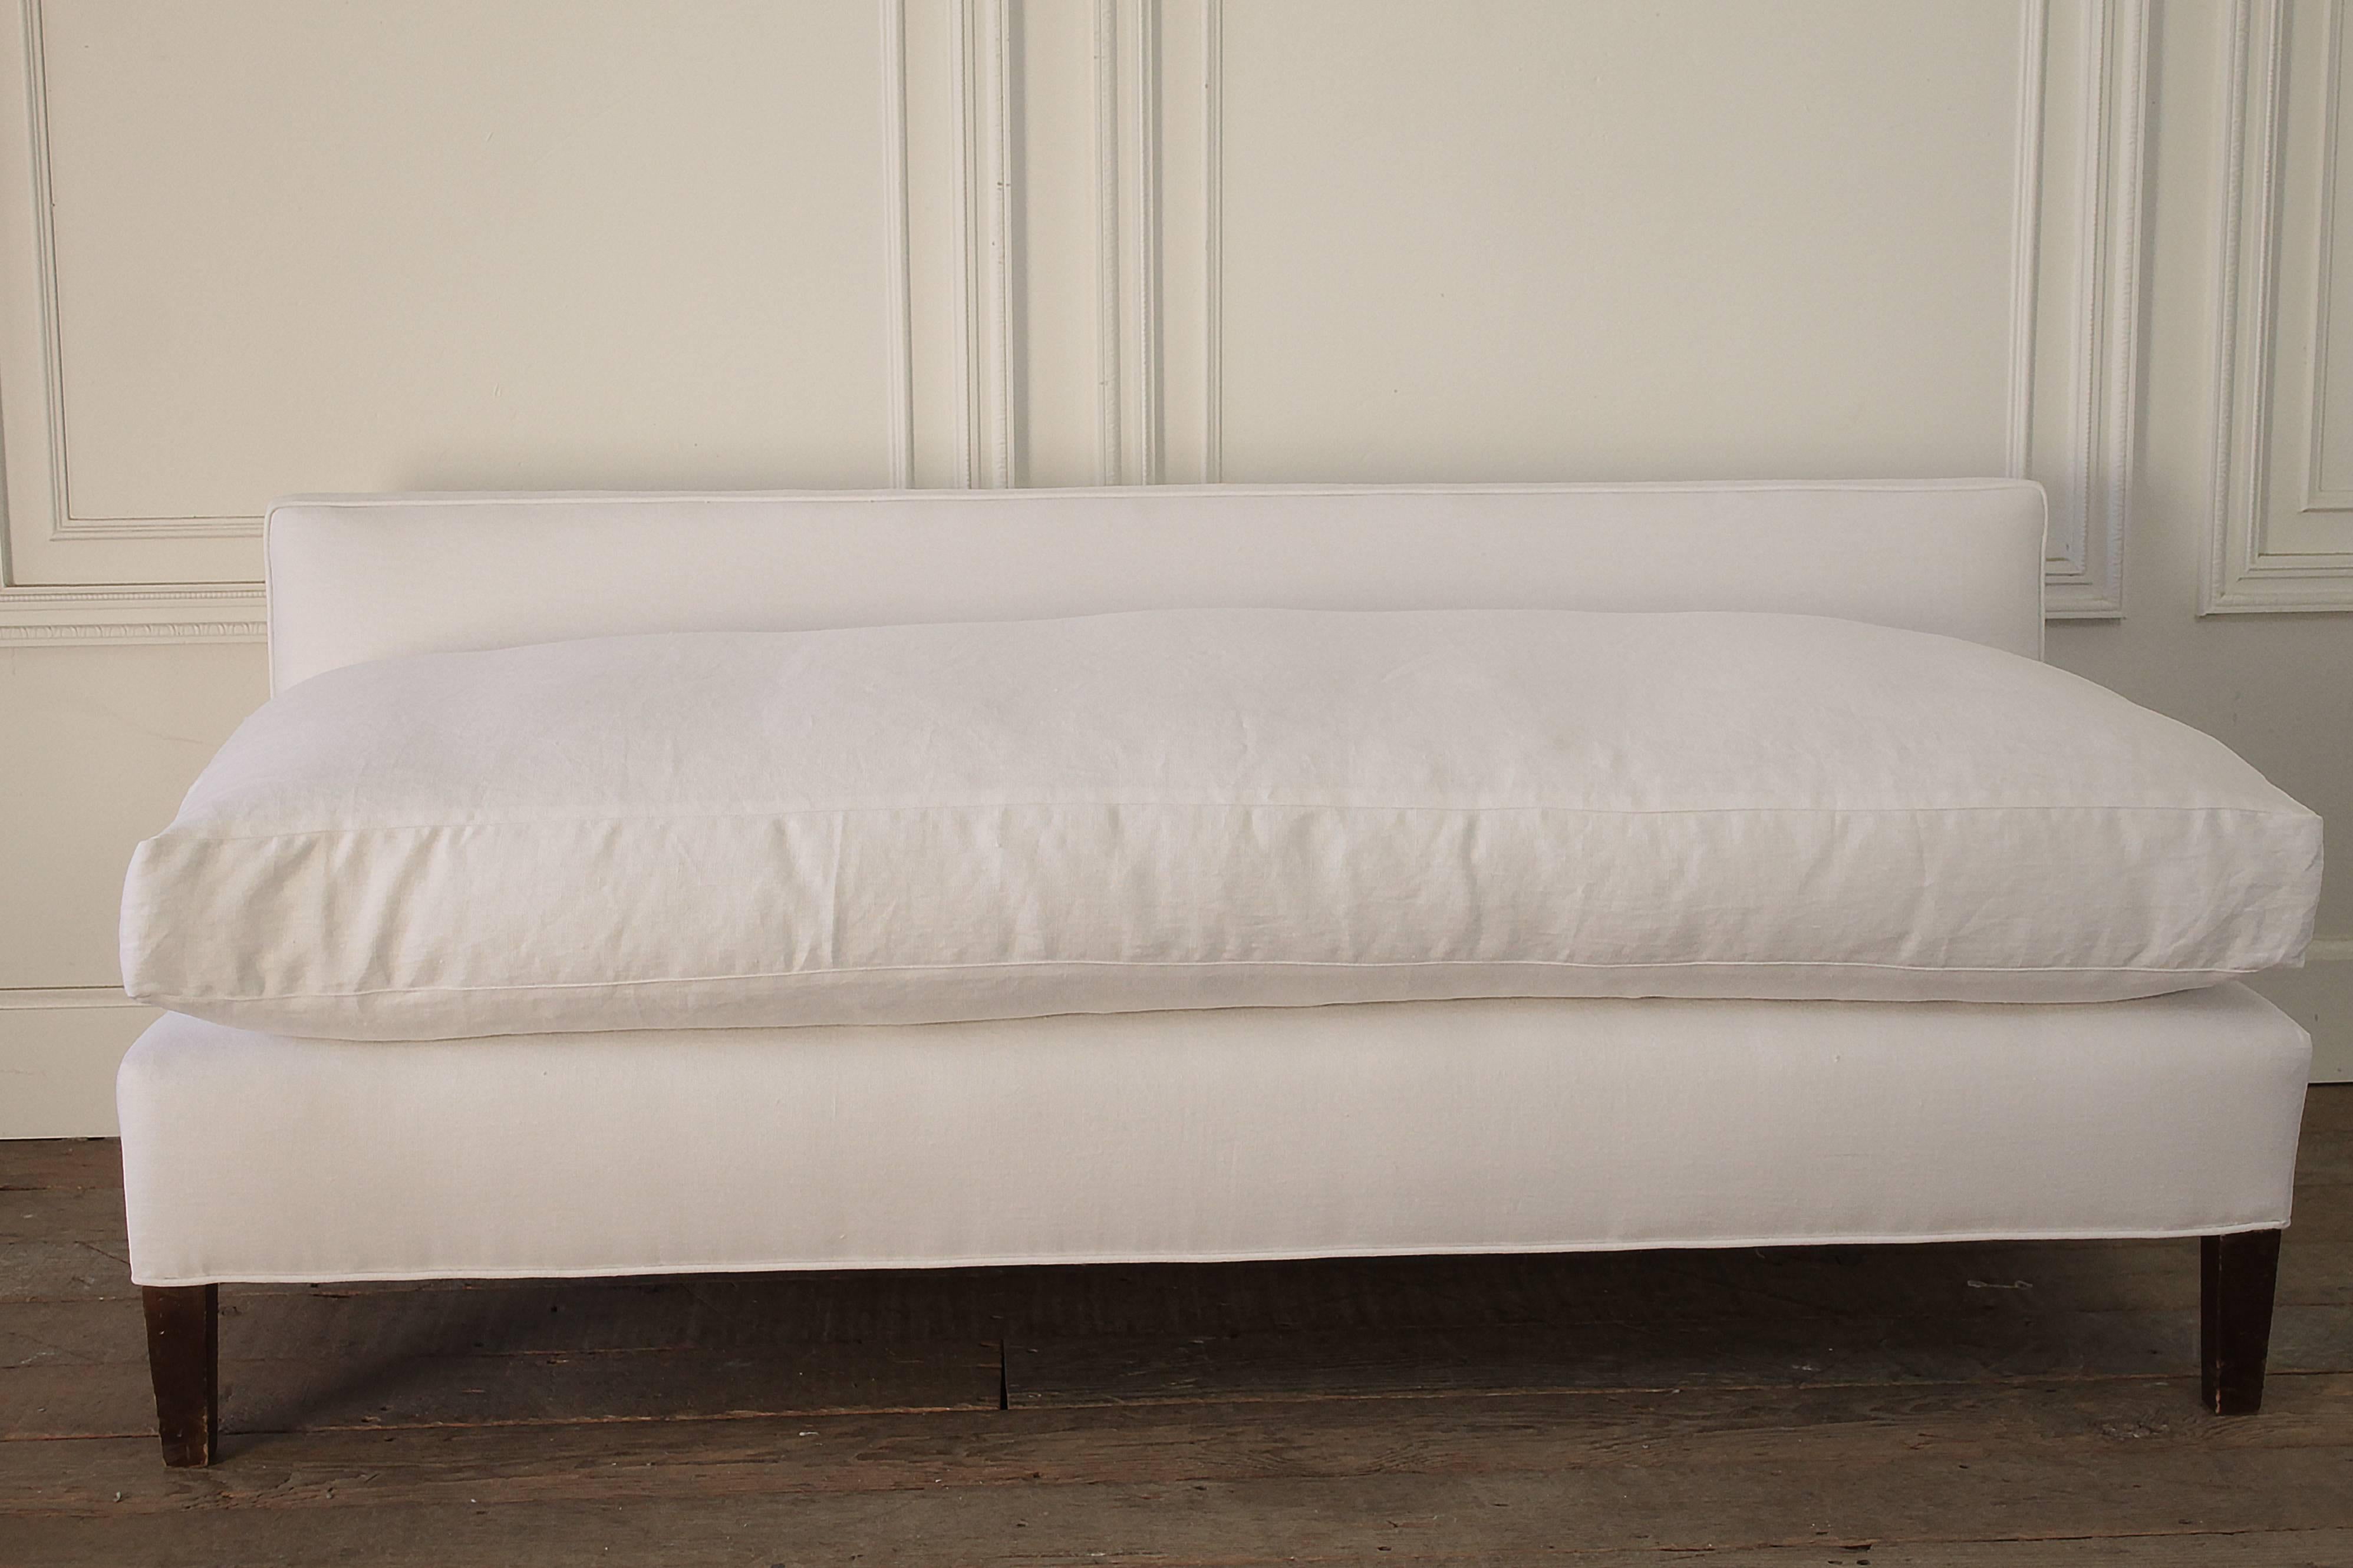 20th Century Mid-Century Modern White Linen Upholstered Bench with Down Cushion